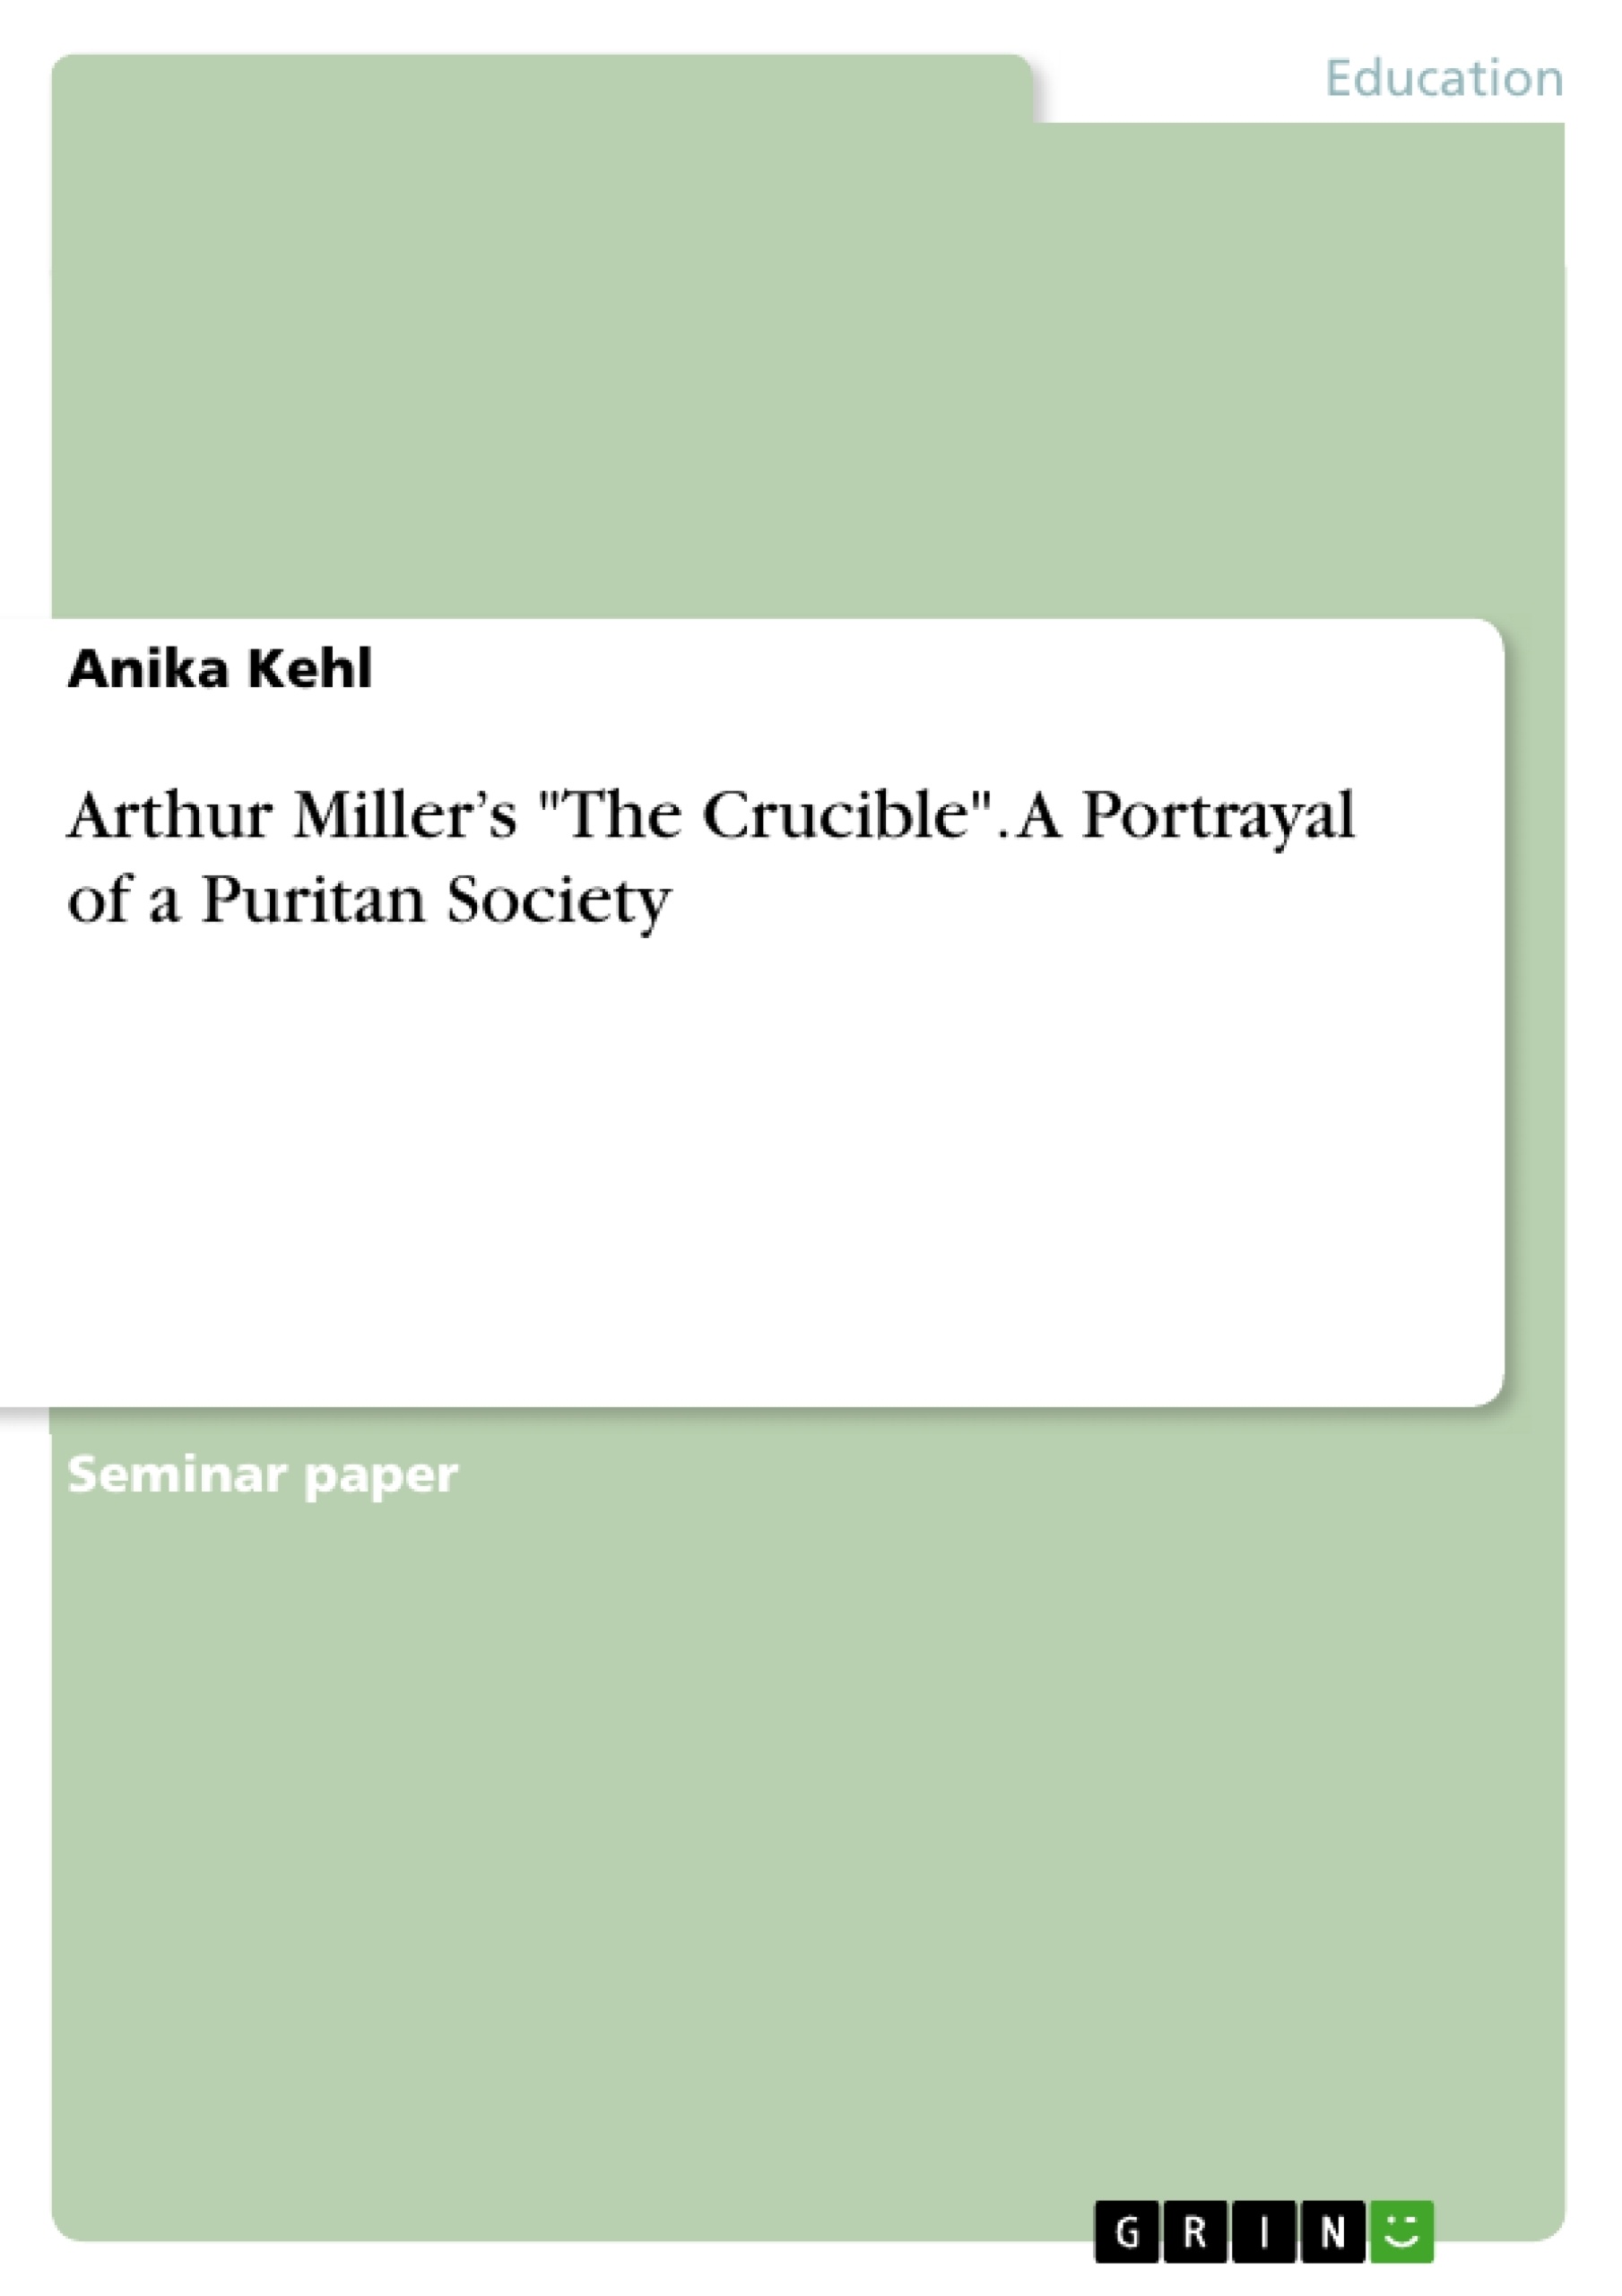 free download arthur miller the crucible